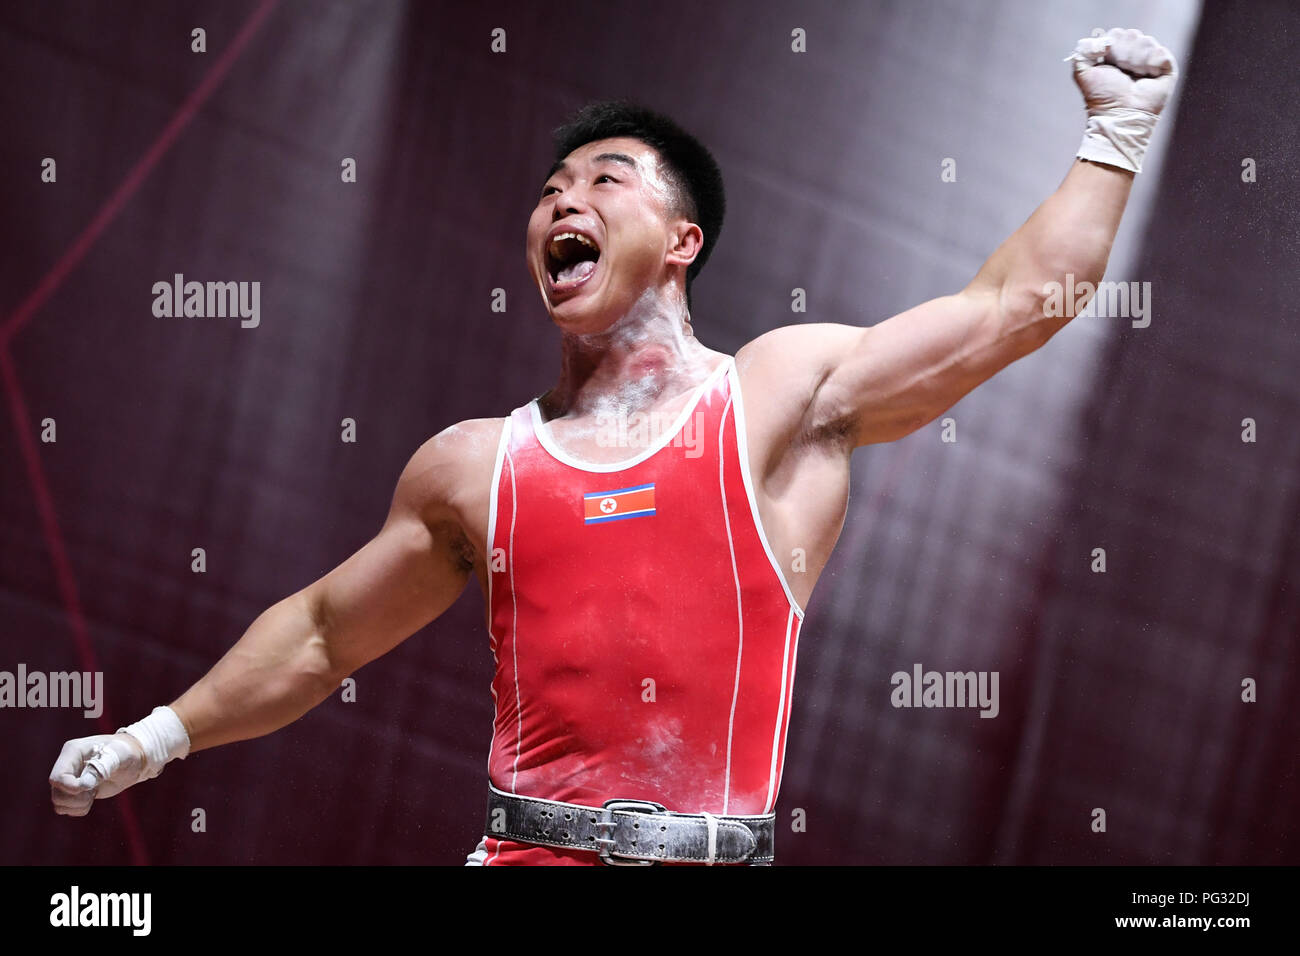 Jakarta, Indonesia. 23rd Aug, 2018. Choe Jon Wi of the Democratic People's  Republic of Korea reacts during men's weightlifting 77kg at the 18th Asian  Games in Jakarta, Indonesia, Aug. 23, 2018. Credit: